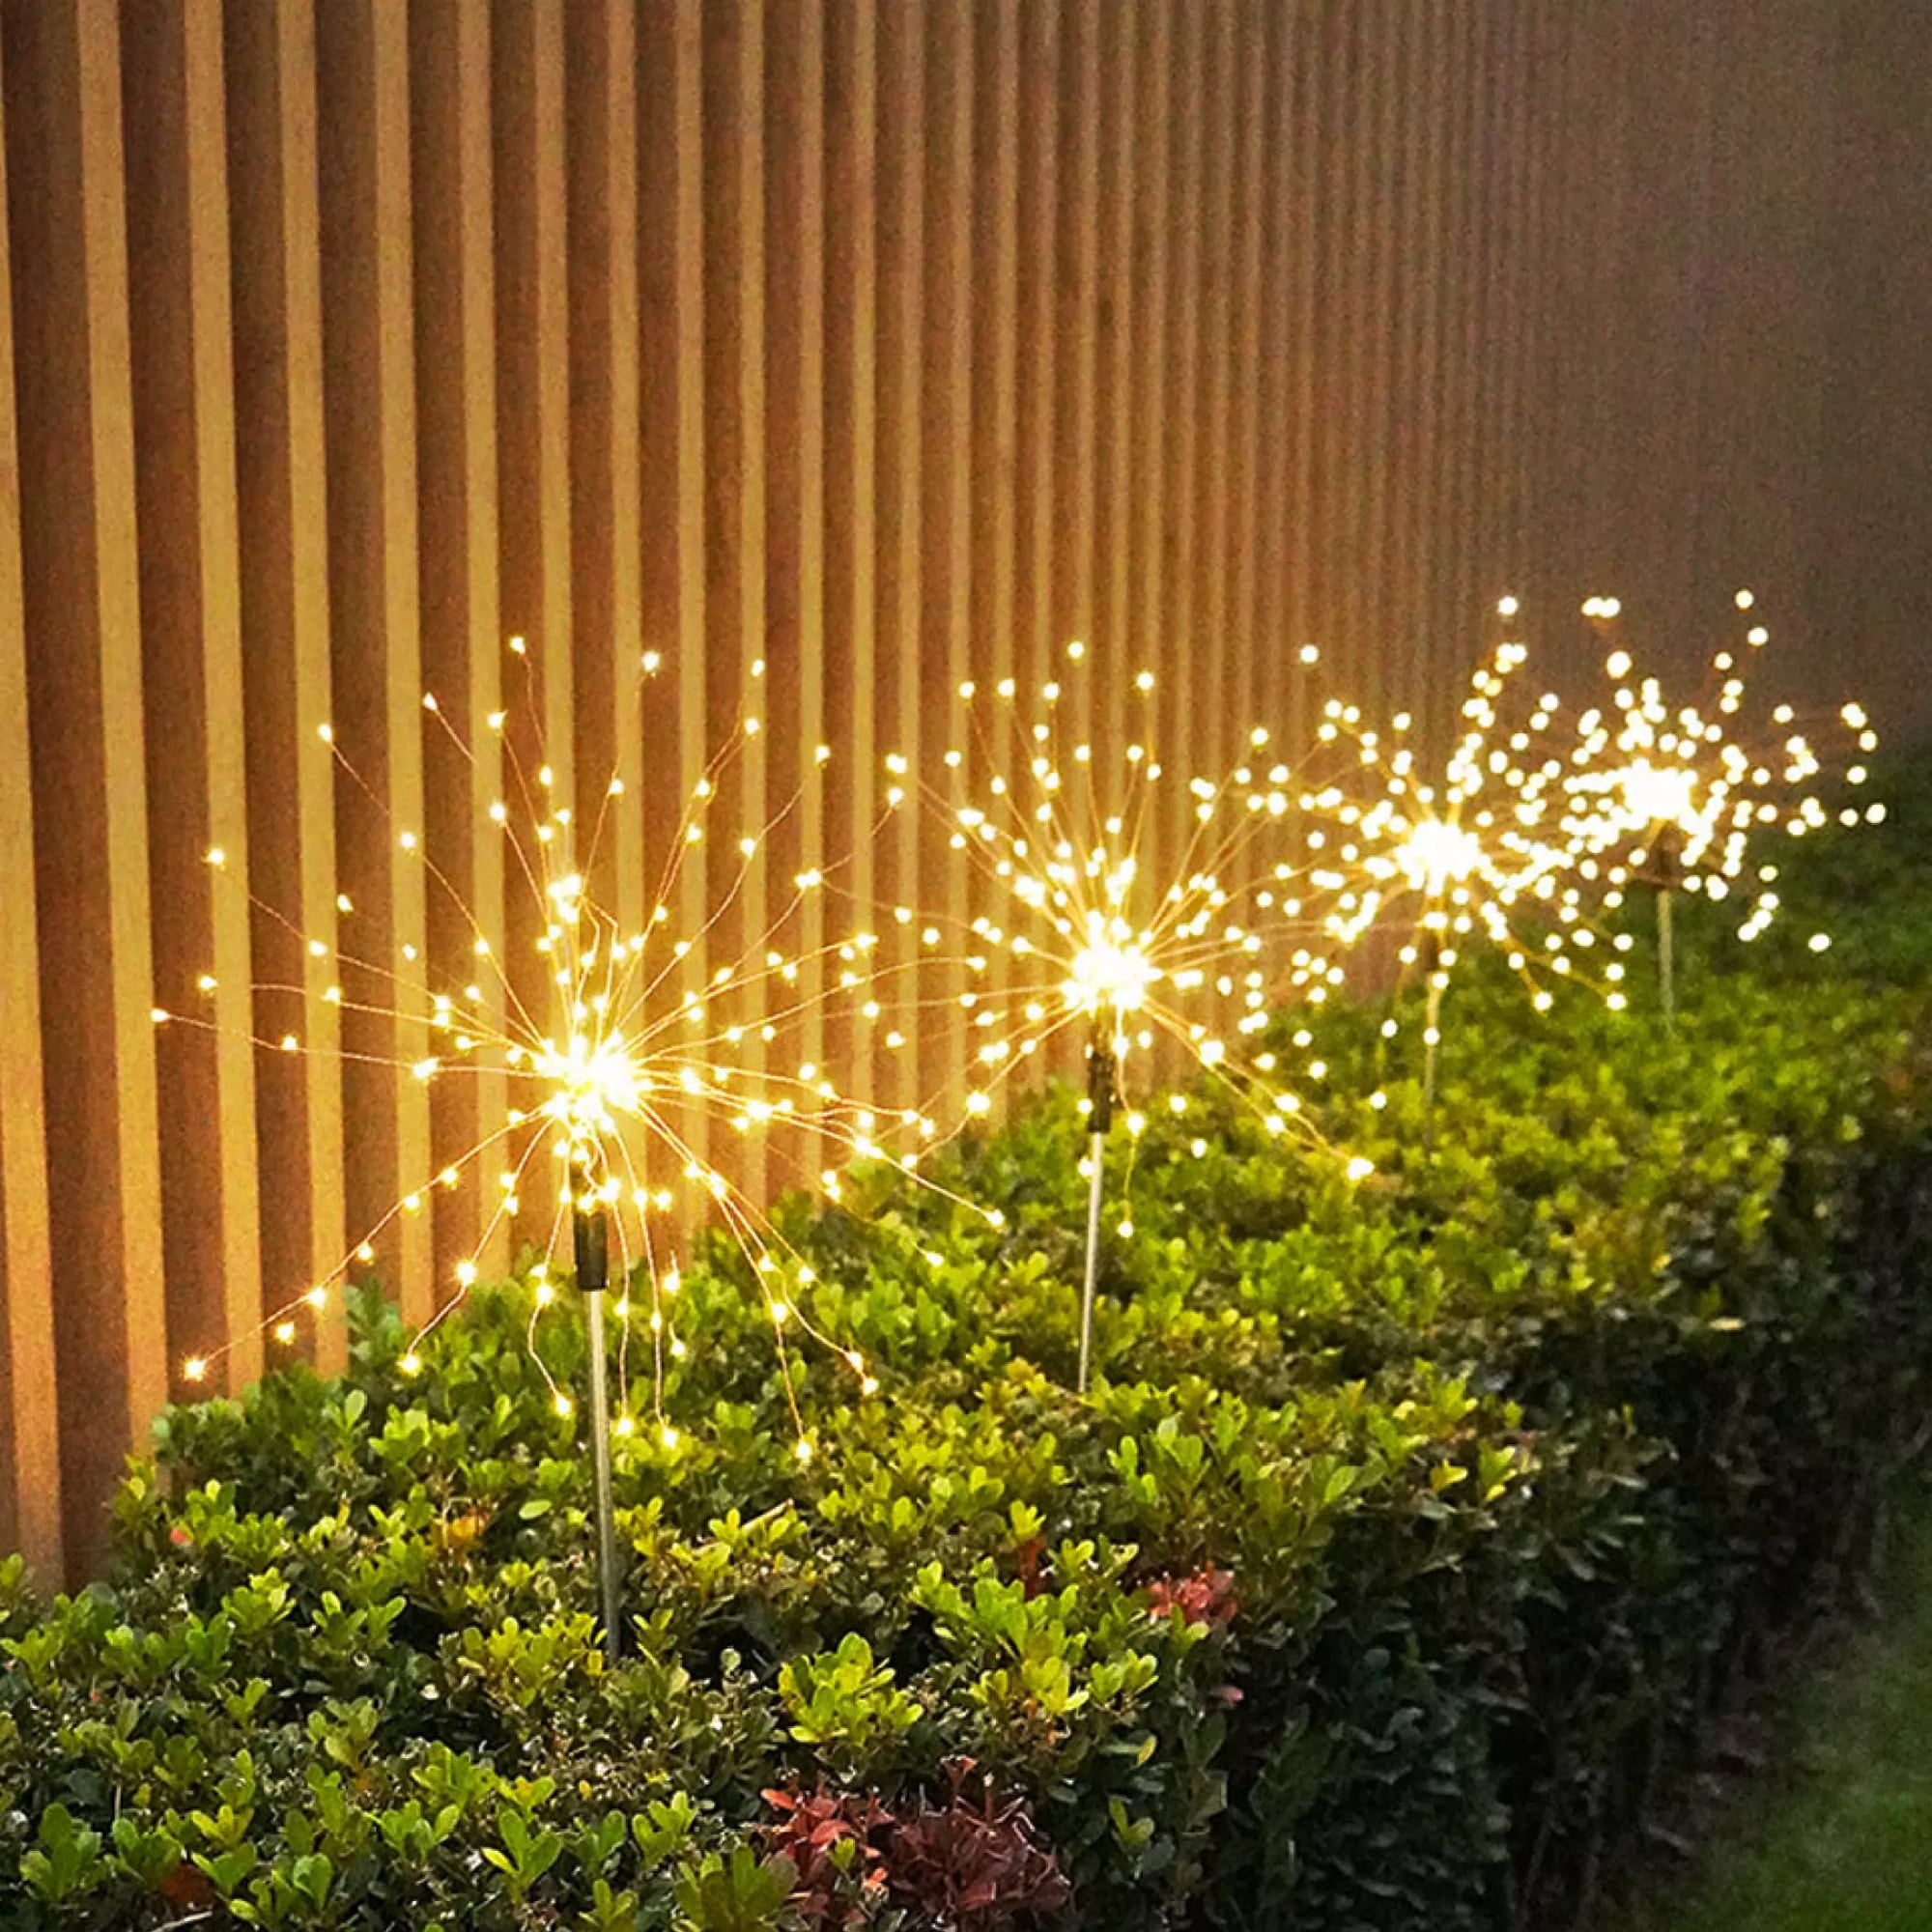 YANSUN White Outdoor Solar Decorative Firework Lights 120 LED Powered 40  Copper Wires String Path Light in Warm White (2-Pack) - On Sale - Bed Bath  & Beyond - 37915479